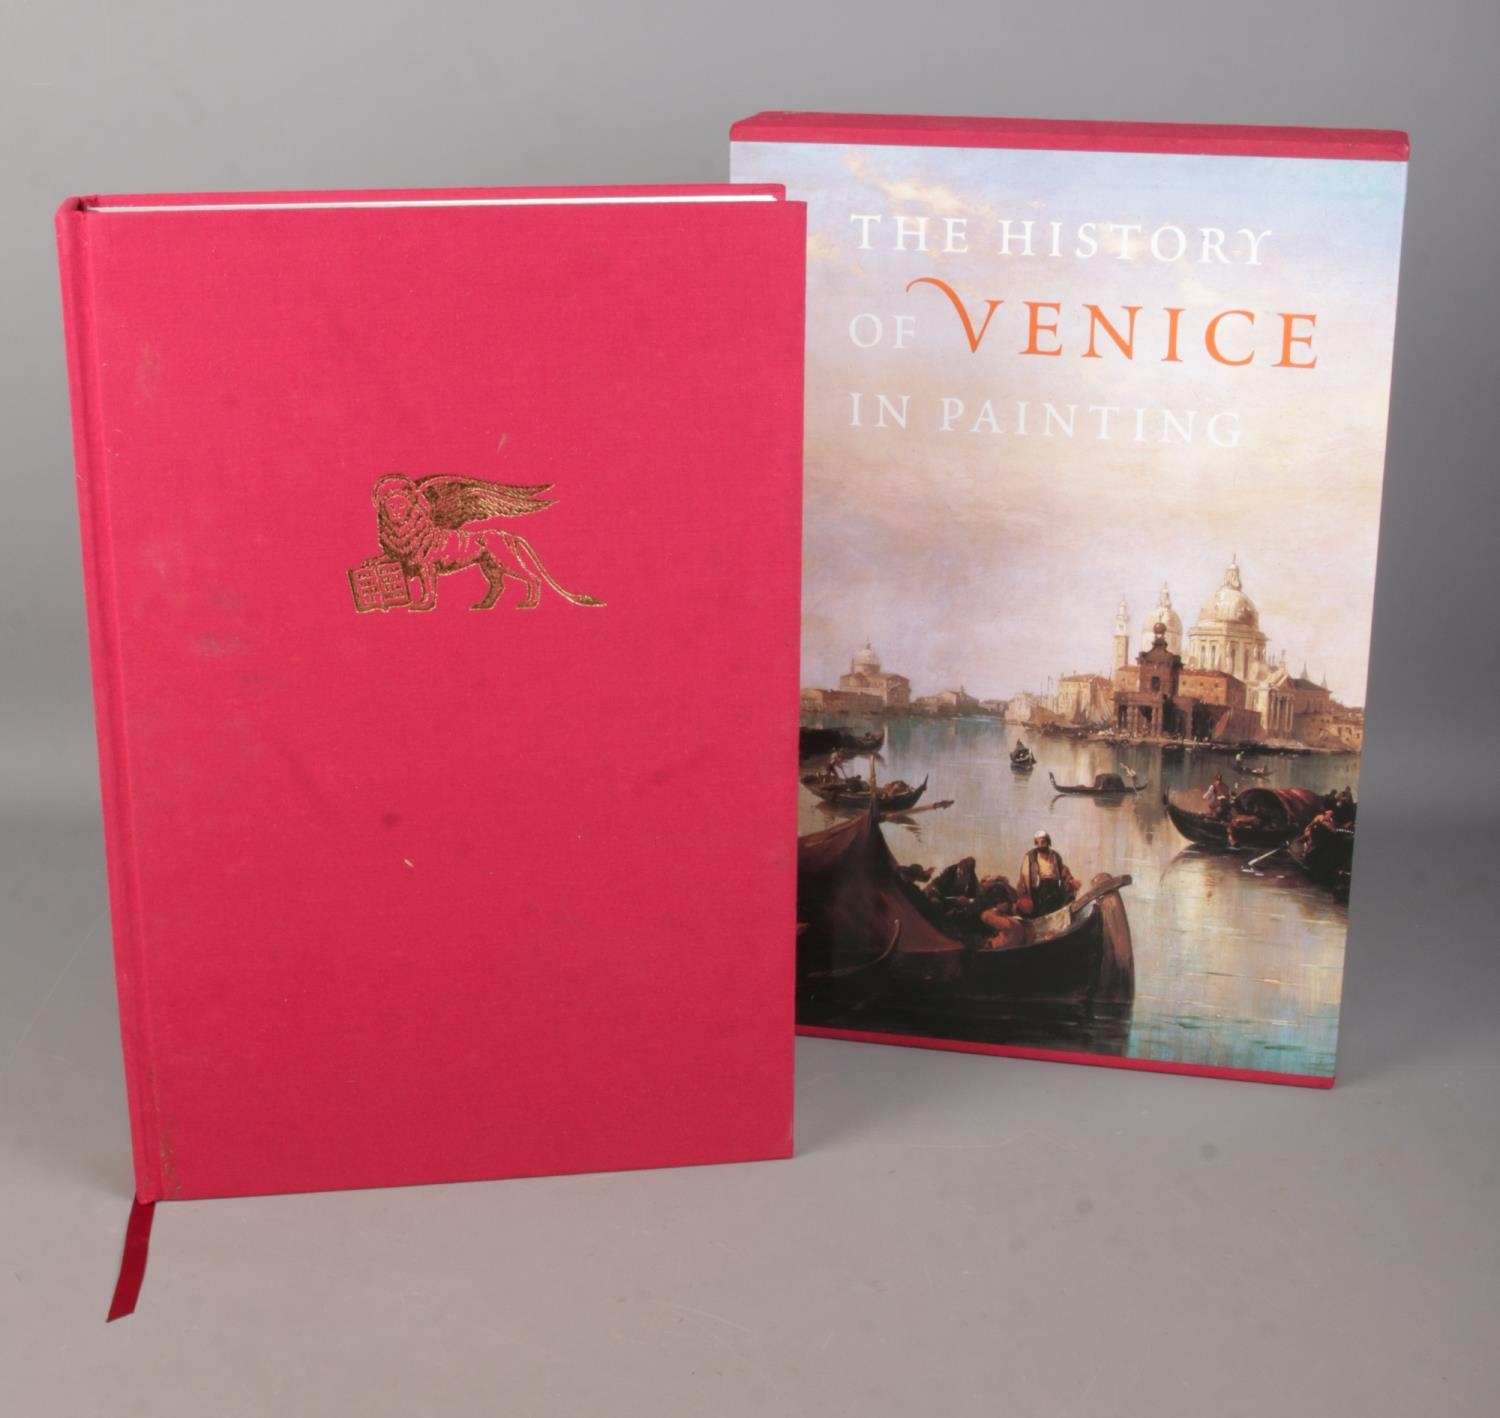 A First Edition Georges Duby & Guy Lobrichon, 'The History of Venice in Painting' book by